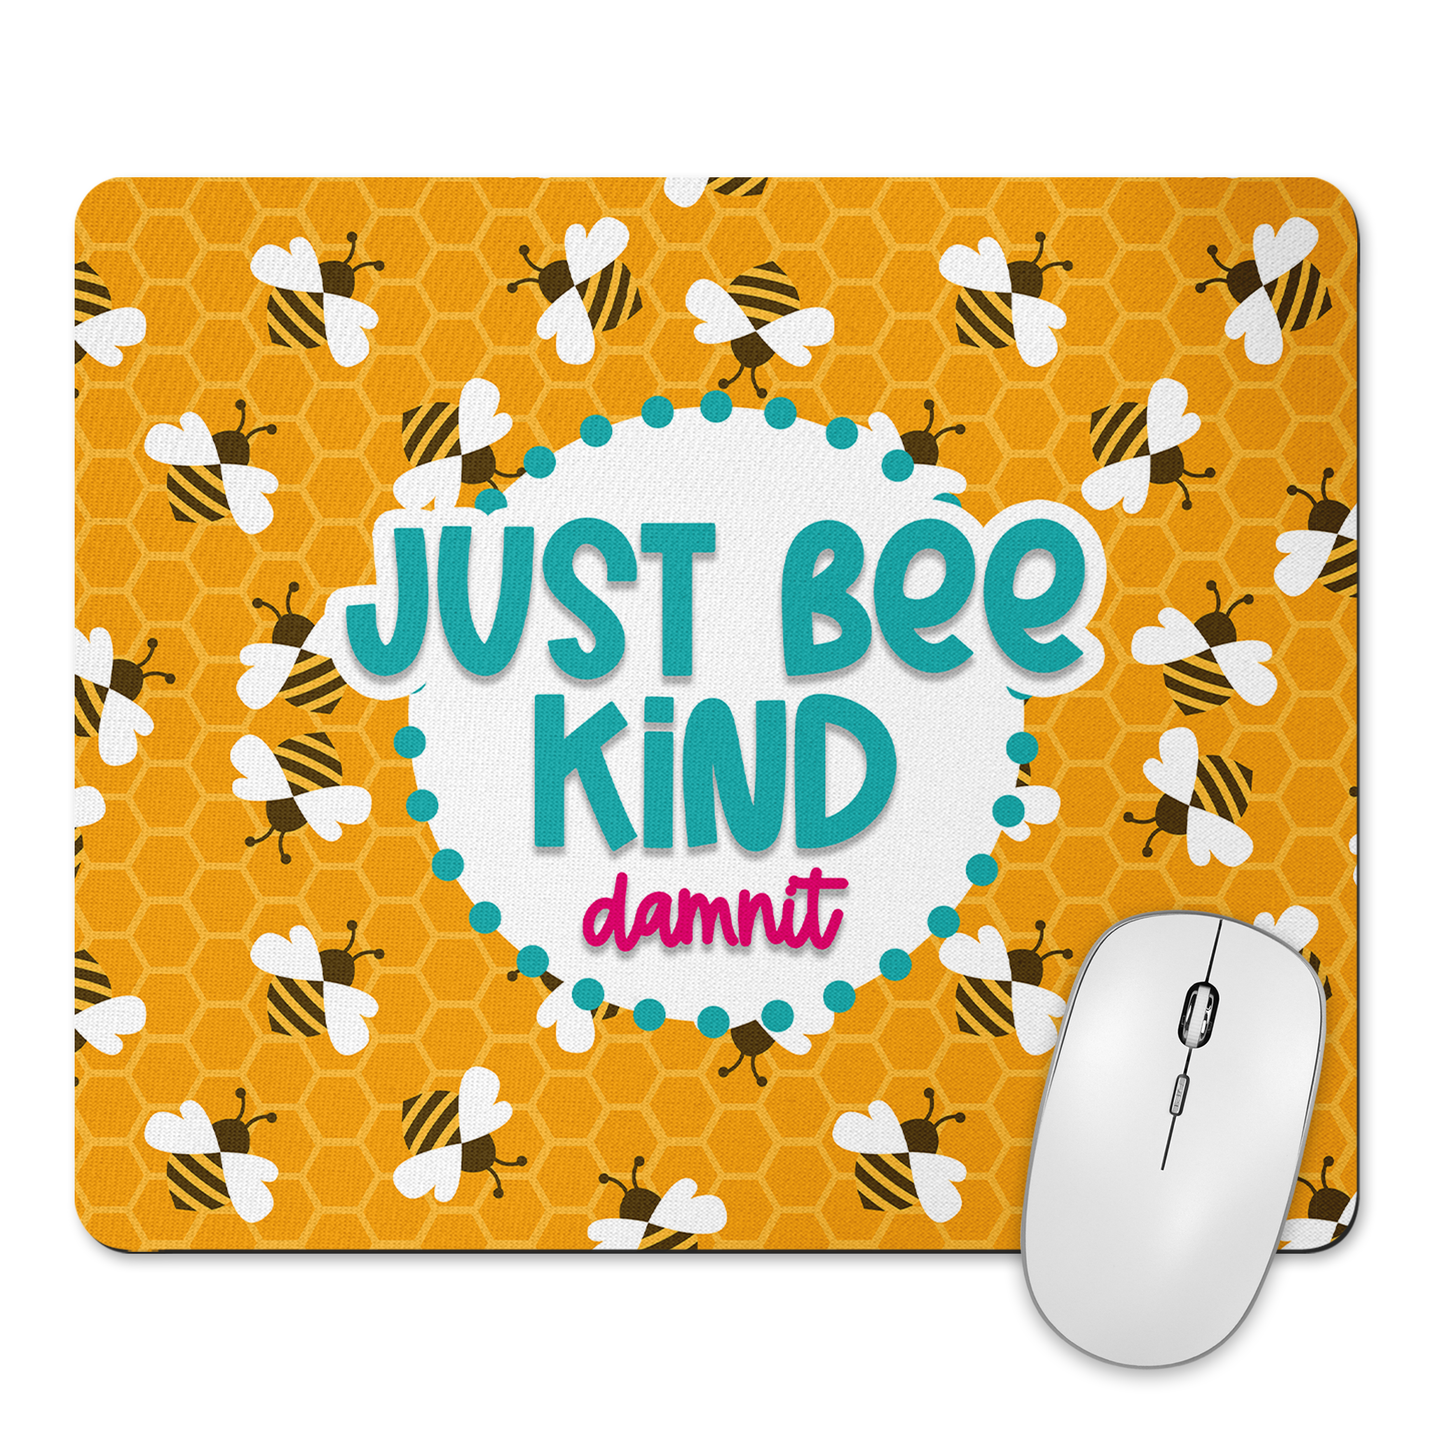 Just Bee Kind Damnit Mousepad Sublimation Transfer